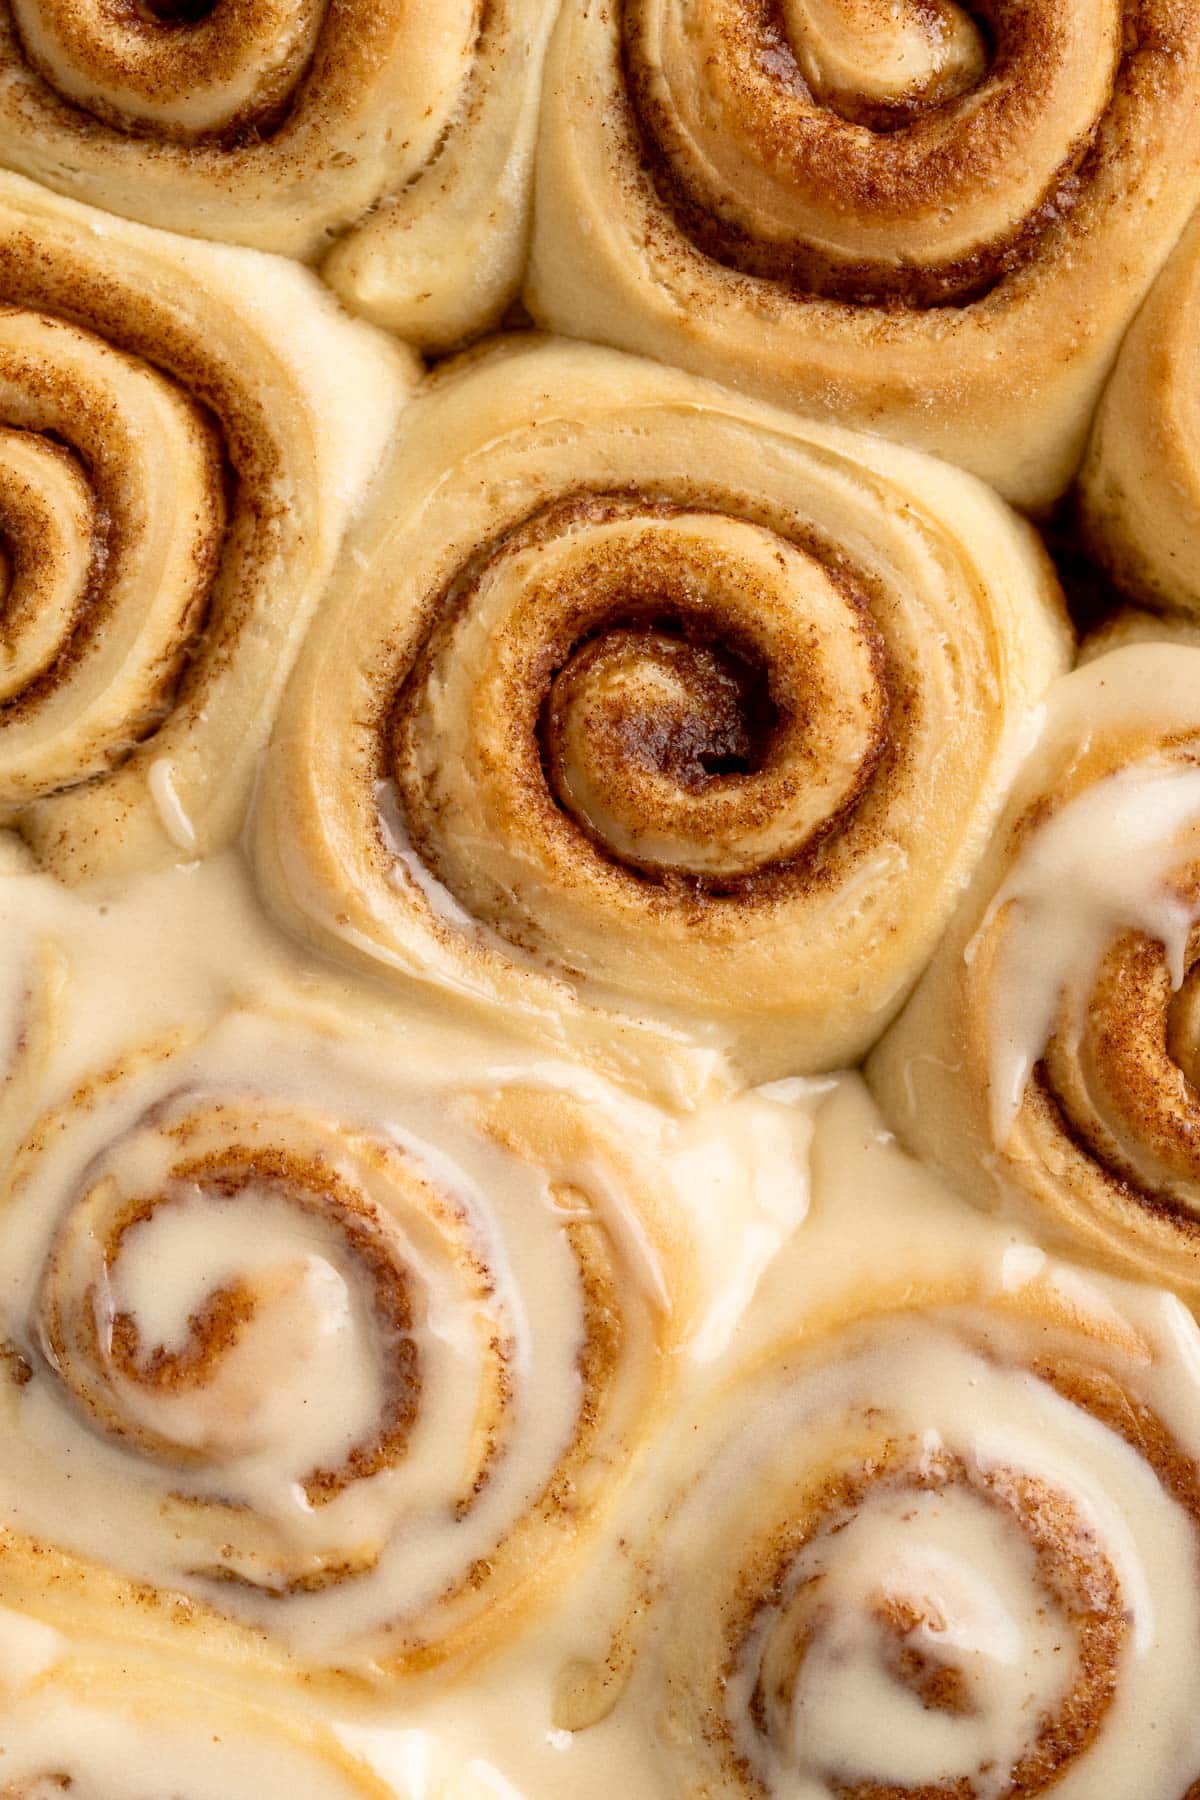 Close up view of cinnamon rolls some with icing and some without.